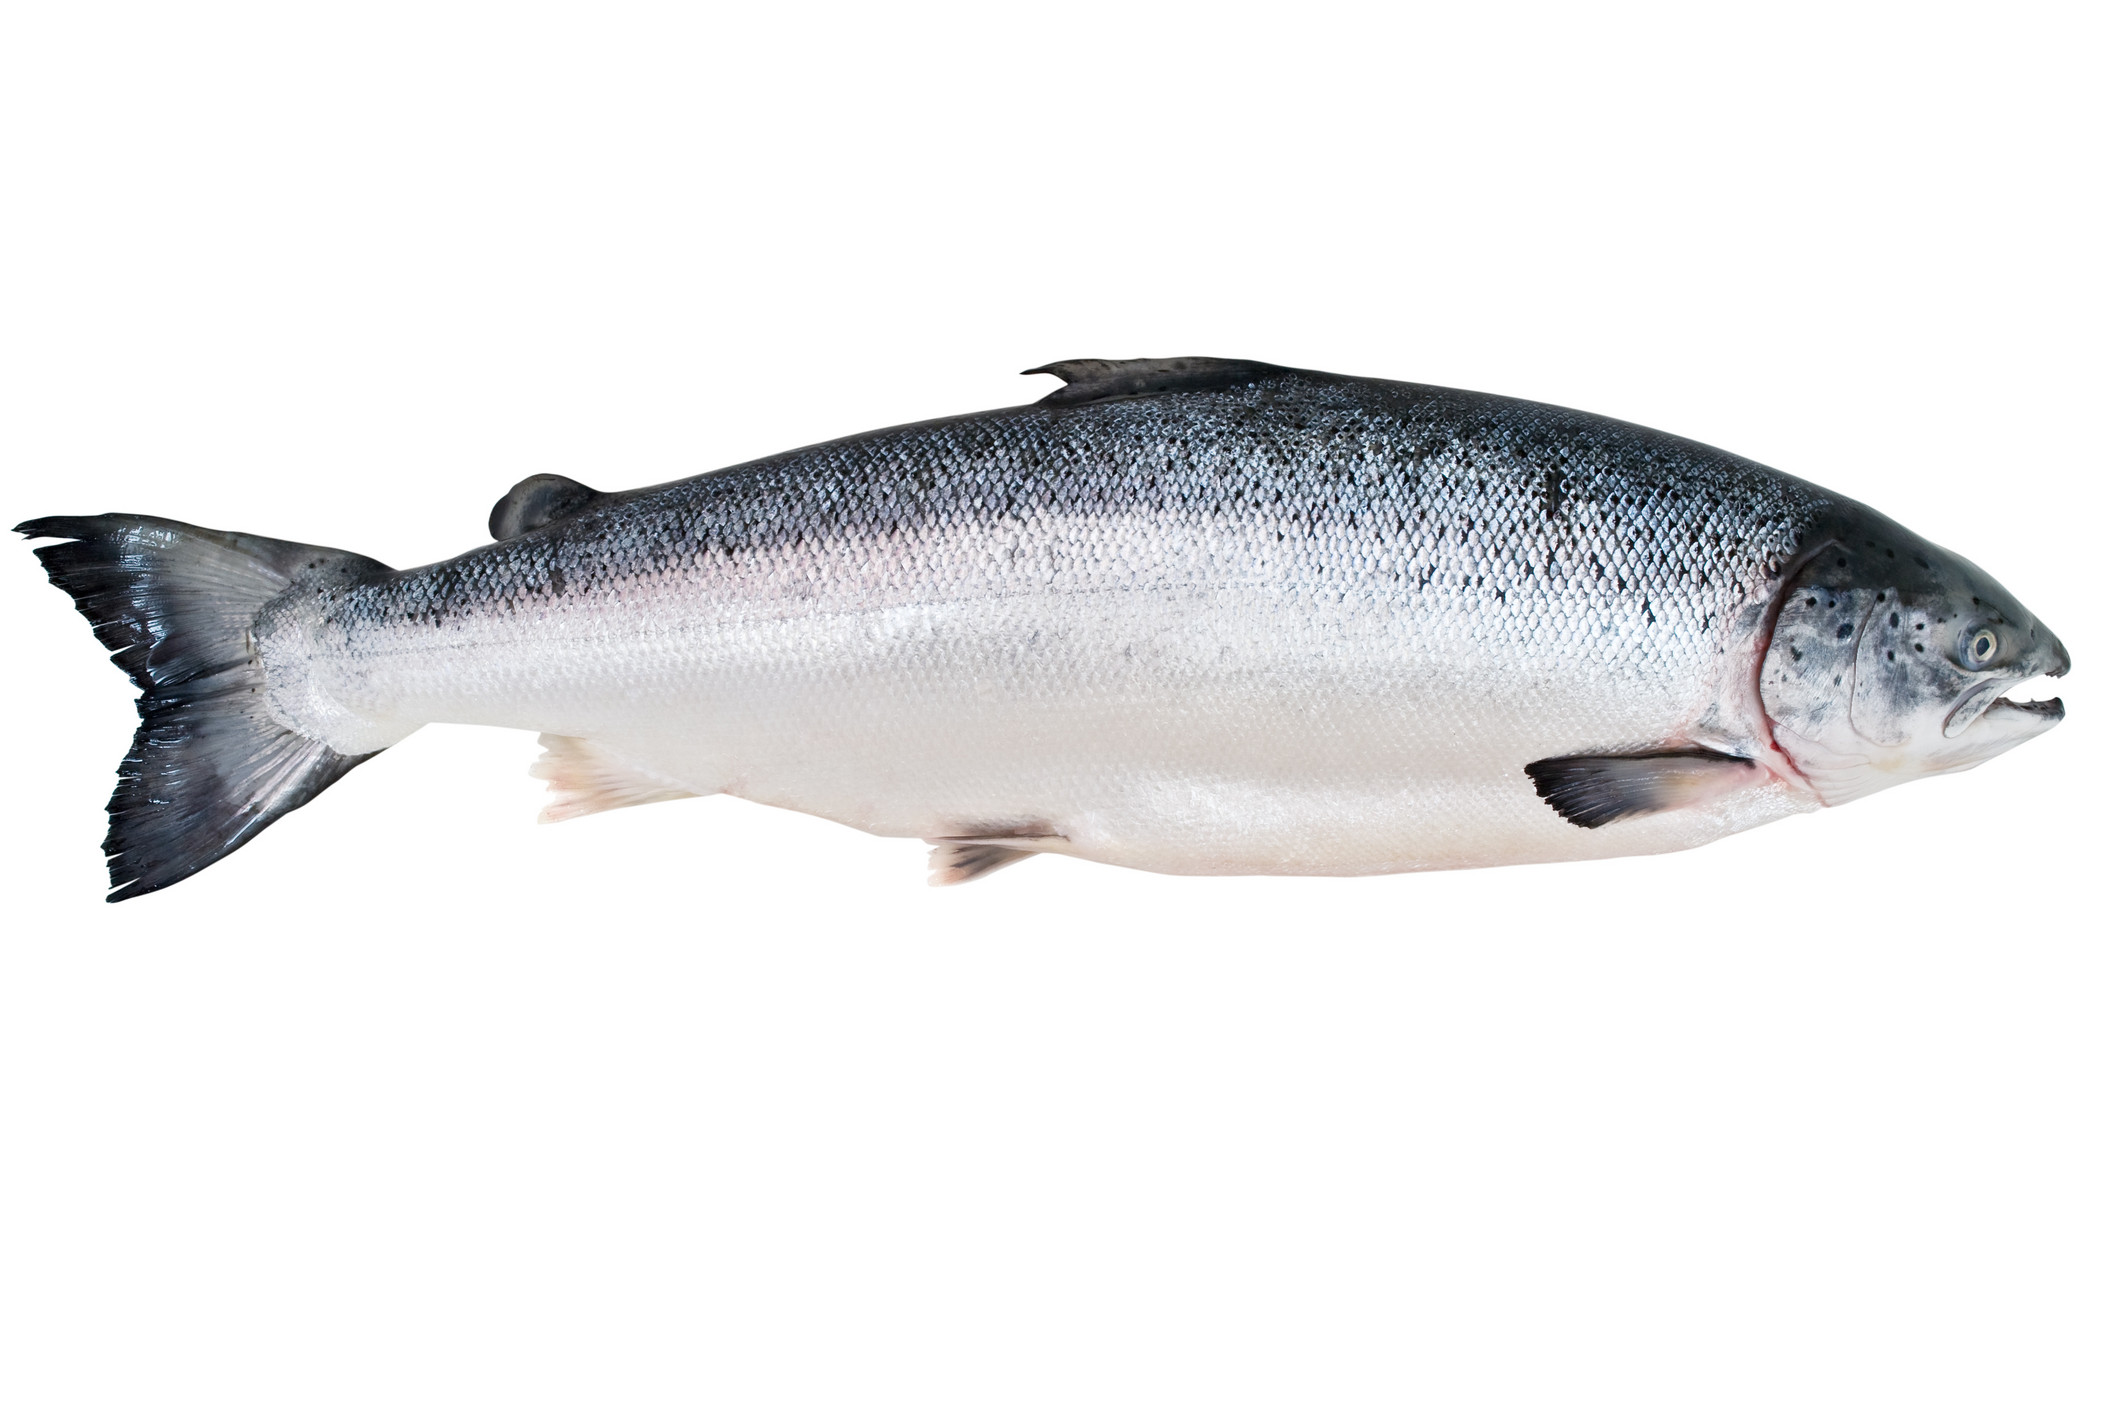 Scientists to develop artificial salmon gut . Photo: Shutterstock